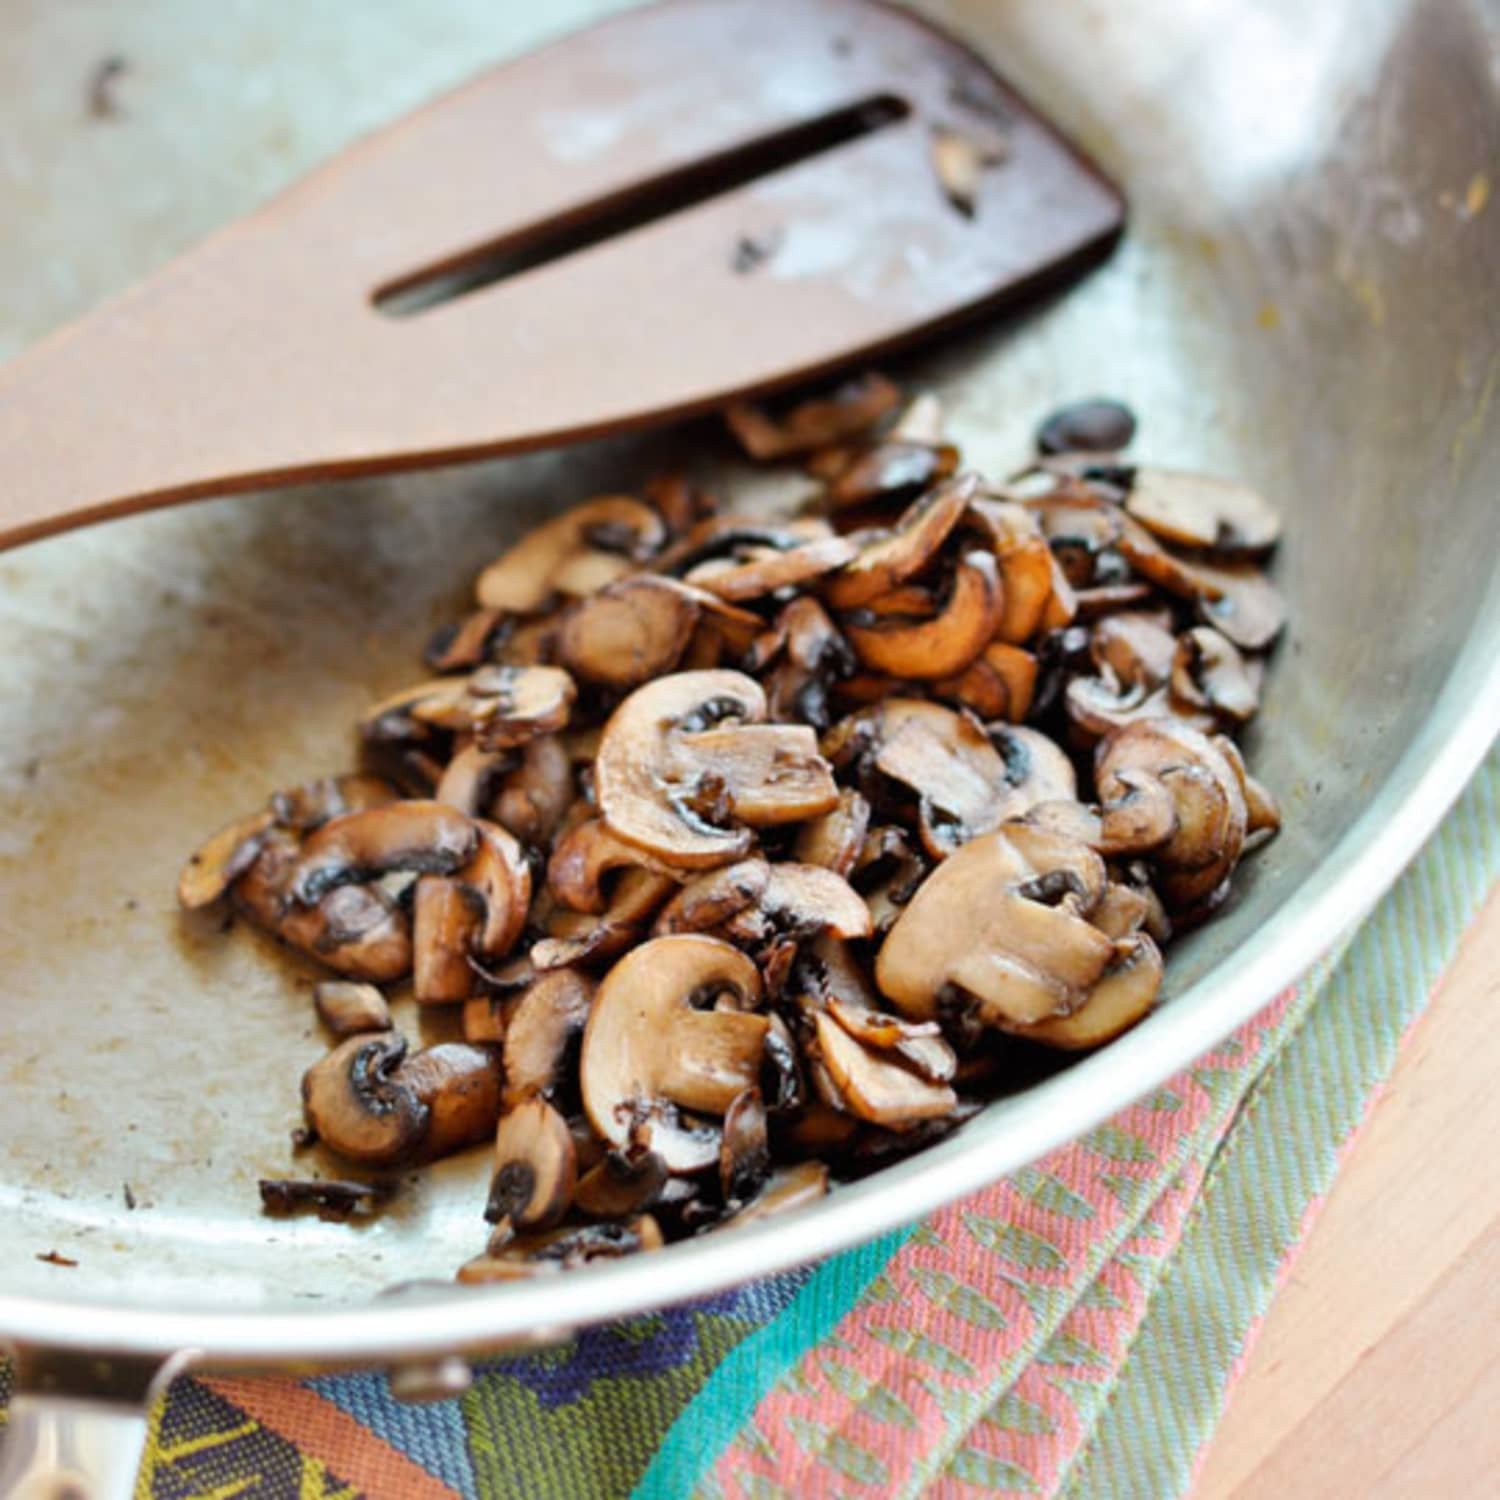 Here’s the Healthiest Way to Cook Mushrooms, According to Science